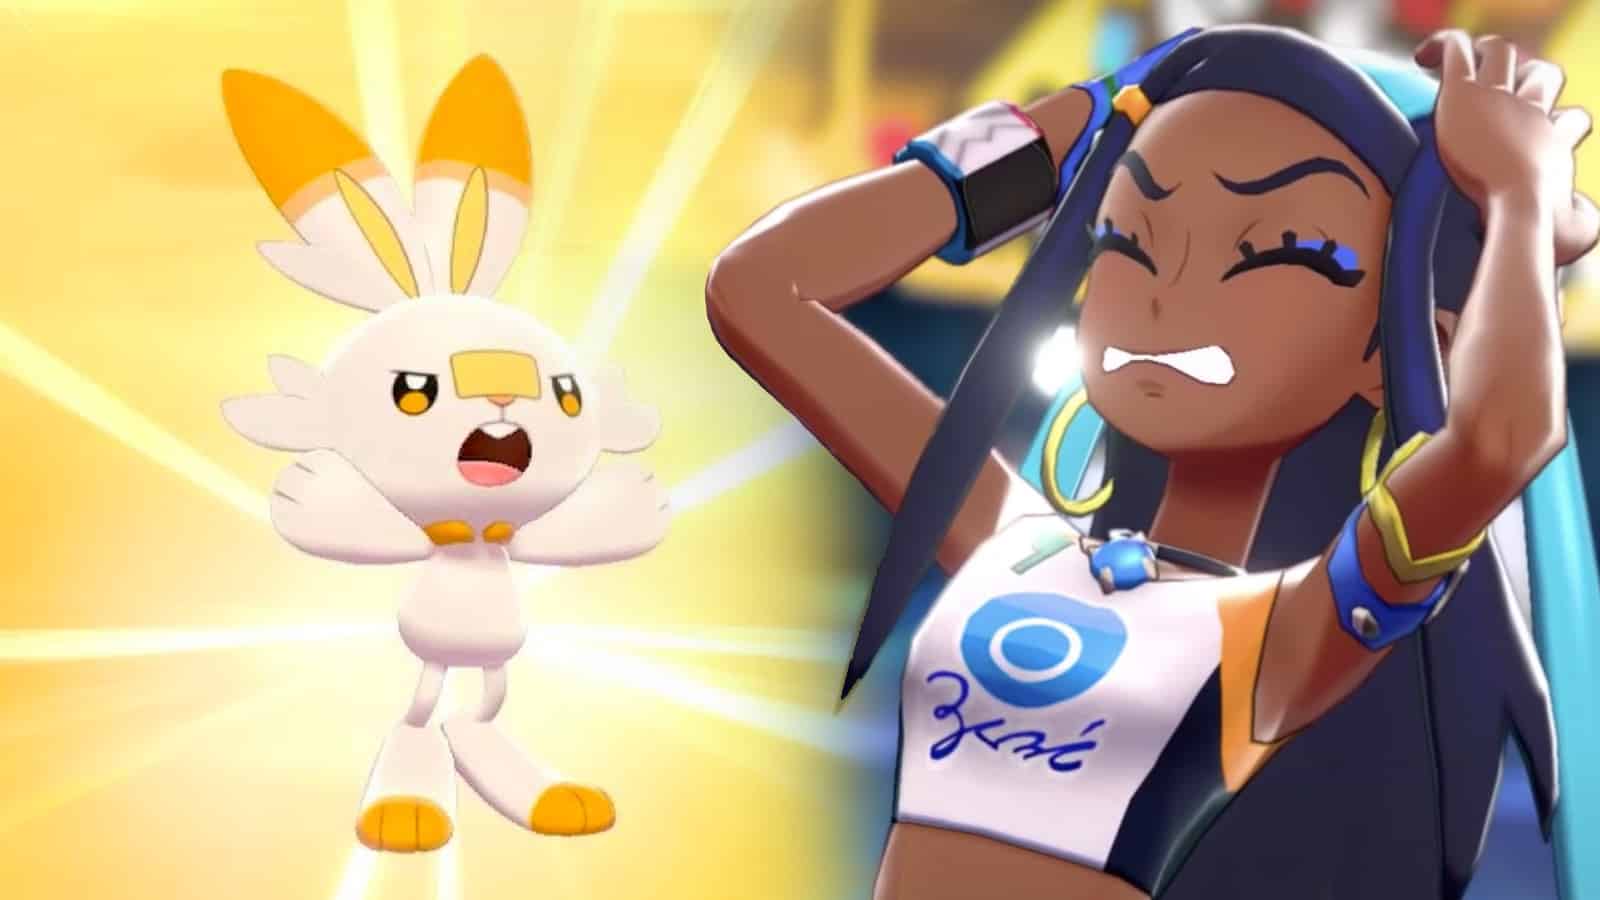 Pokémon Sword and Shield guide: How to catch and breed Shiny